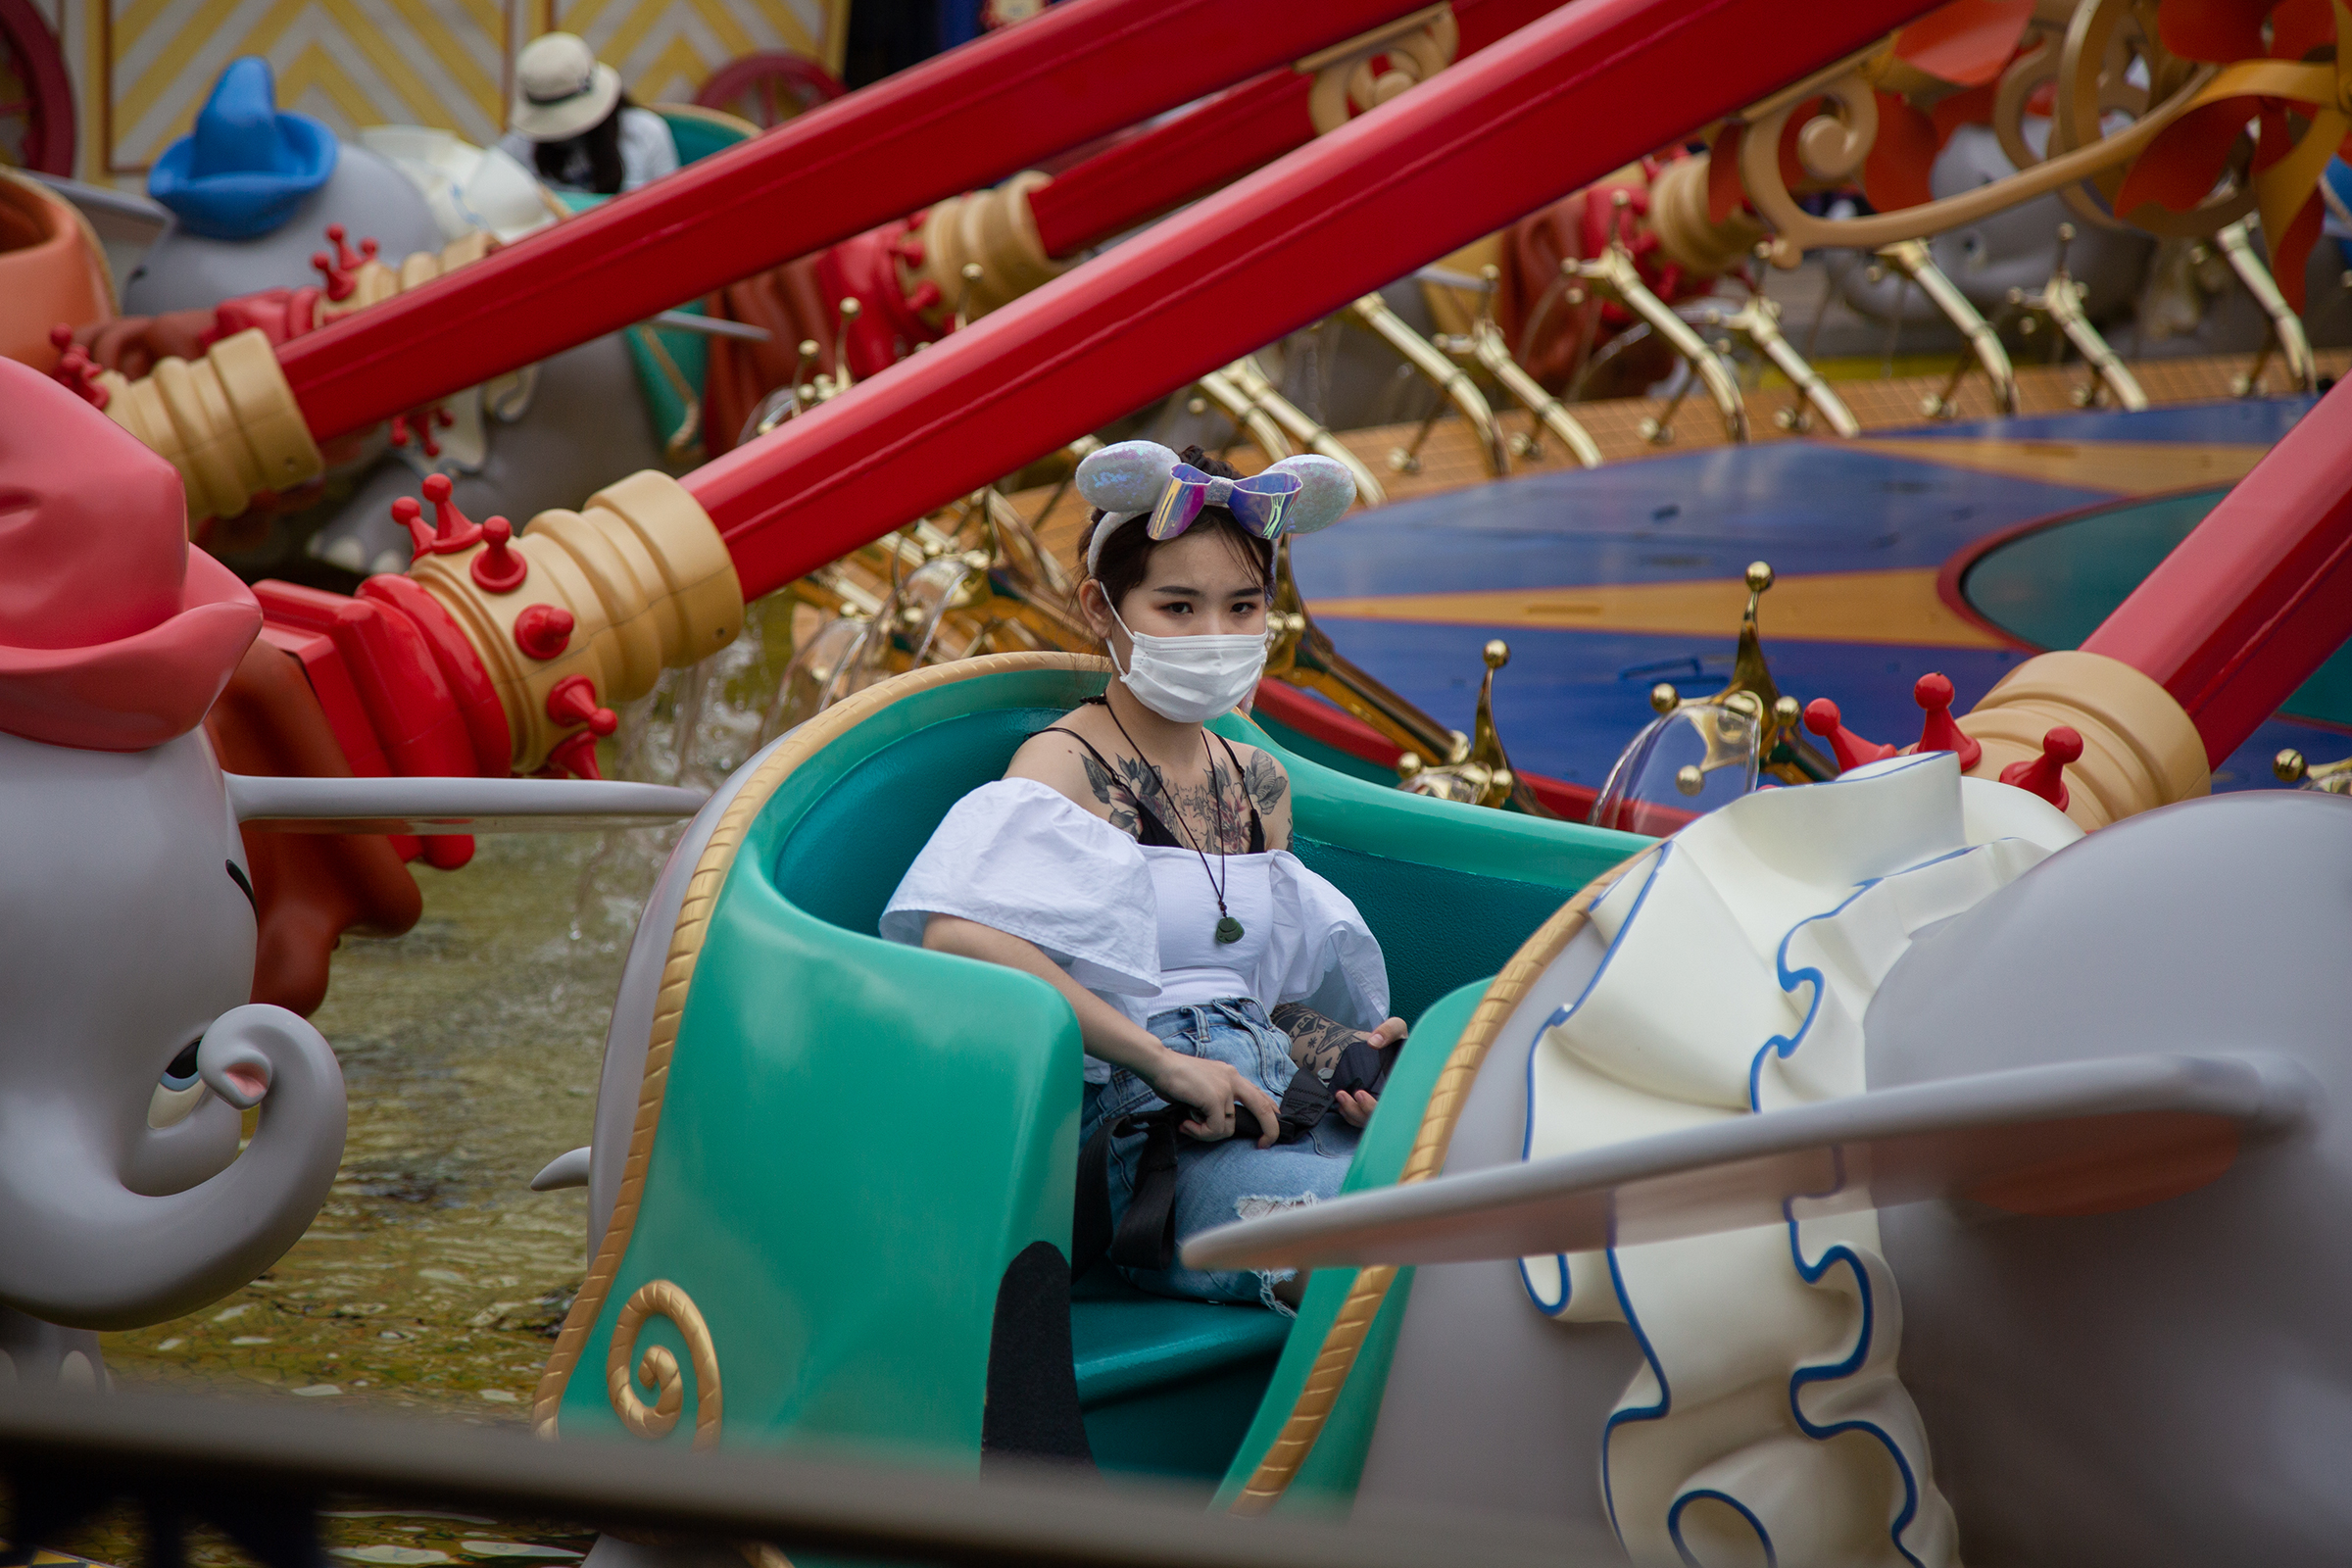 A visitor sits on the Dumbo the Flying Elephant attraction at Shanghai Disneyland on May 11, the day it reopened.